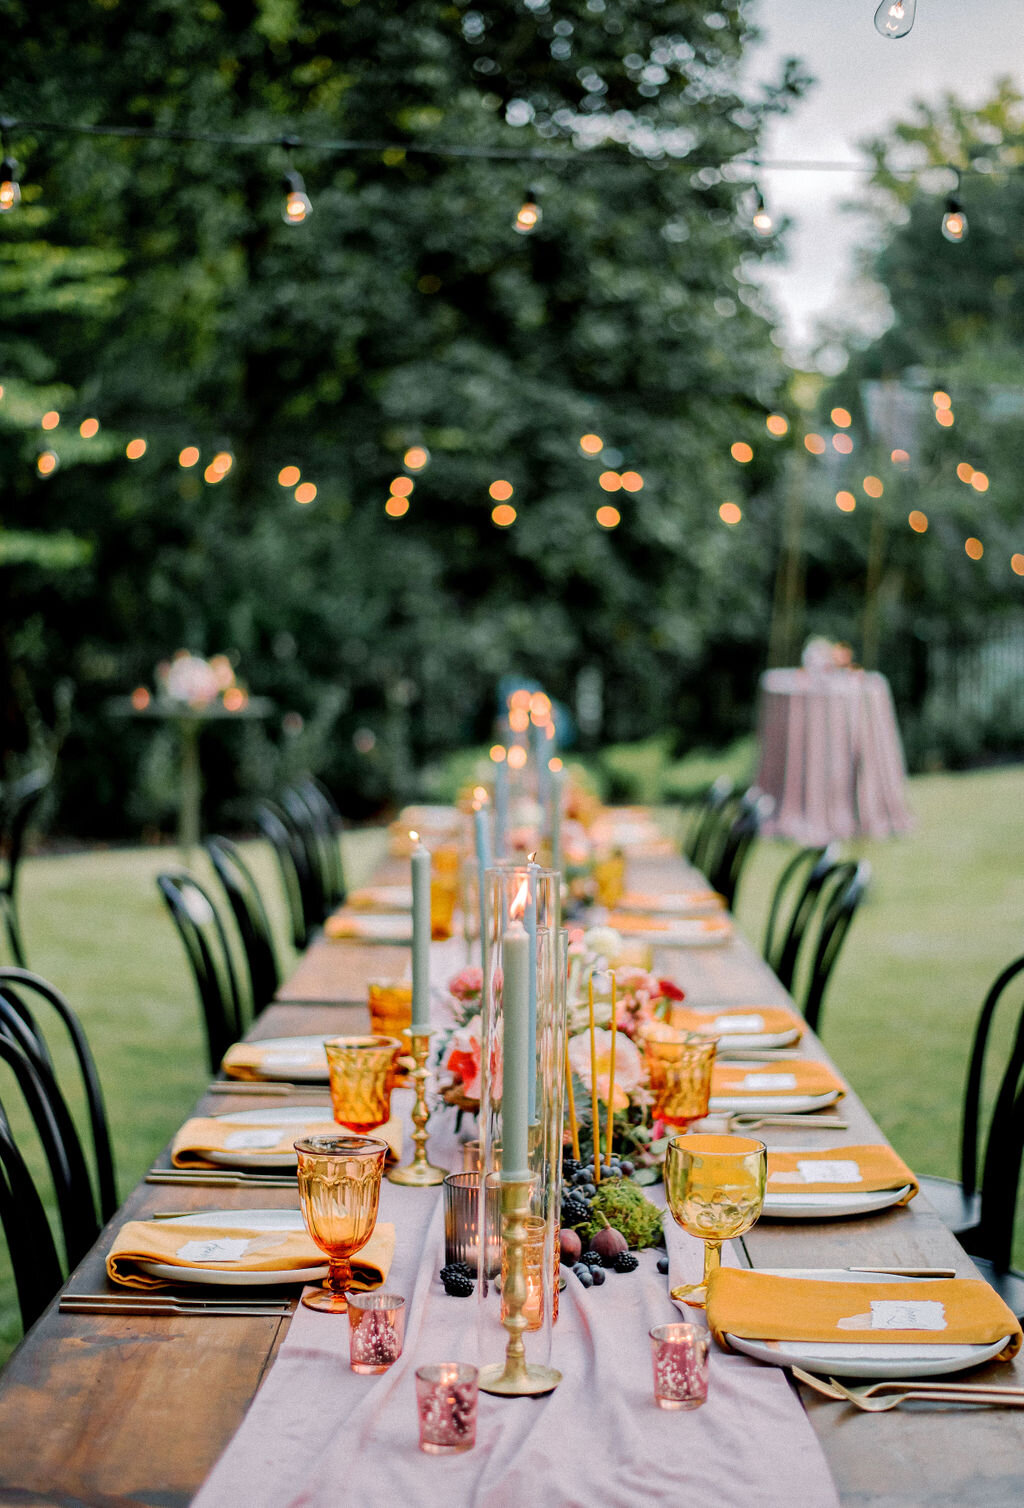 Intimate Backyard Dinner Party | Simply Charming Socials | Atlanta Event Planner